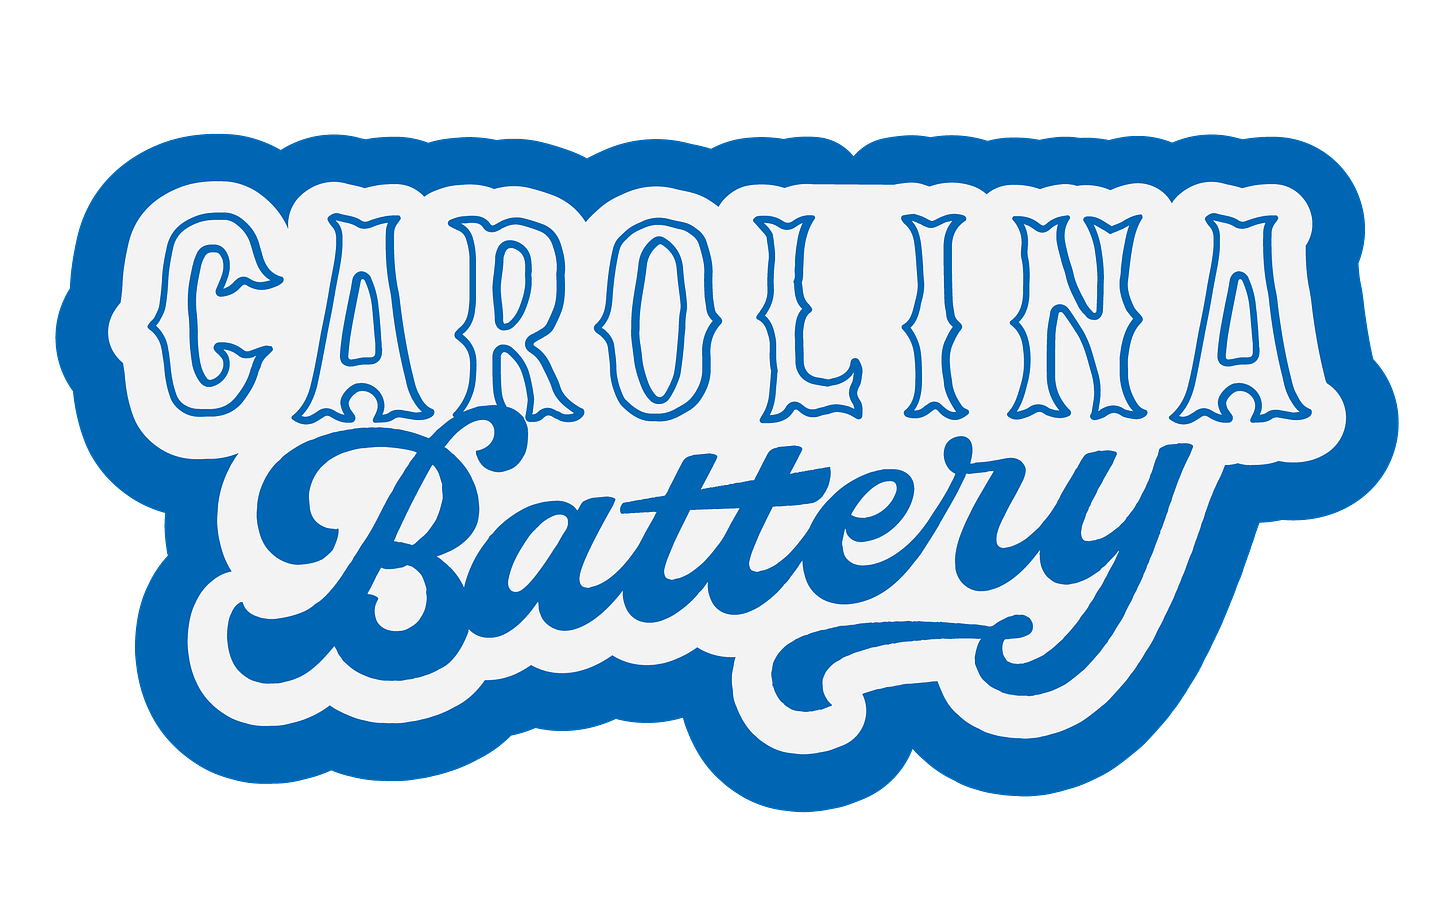 Sticker outlined in blue that says "Carolina" in stylized all-caps letters, white with a blue outline, and then "Battery" in solid blue baseball-y script font under that.